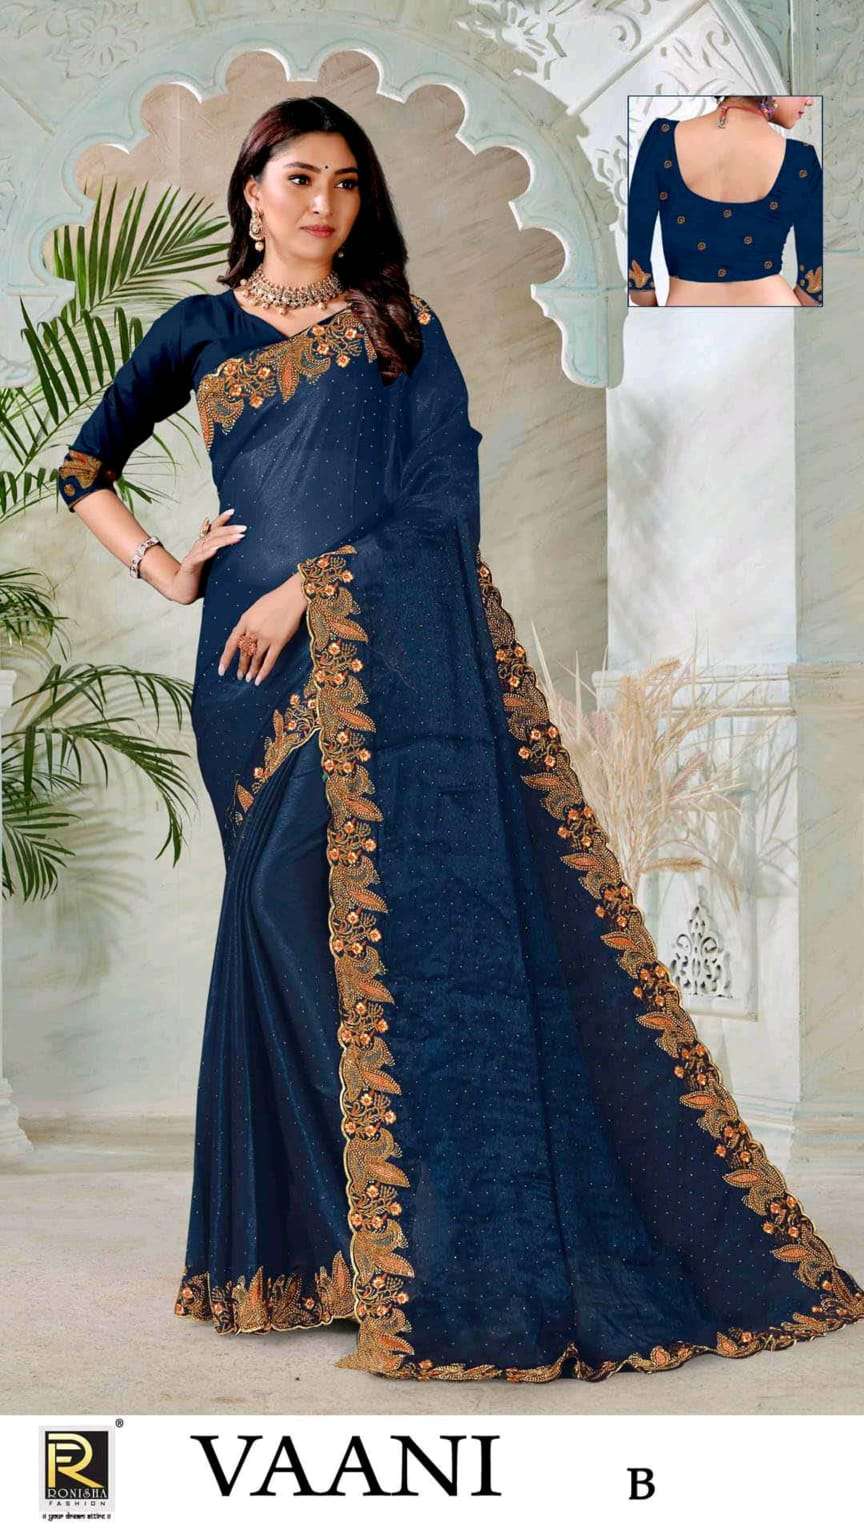 Vaani new launching Embroidery sarees Surat Manufacturing Brand